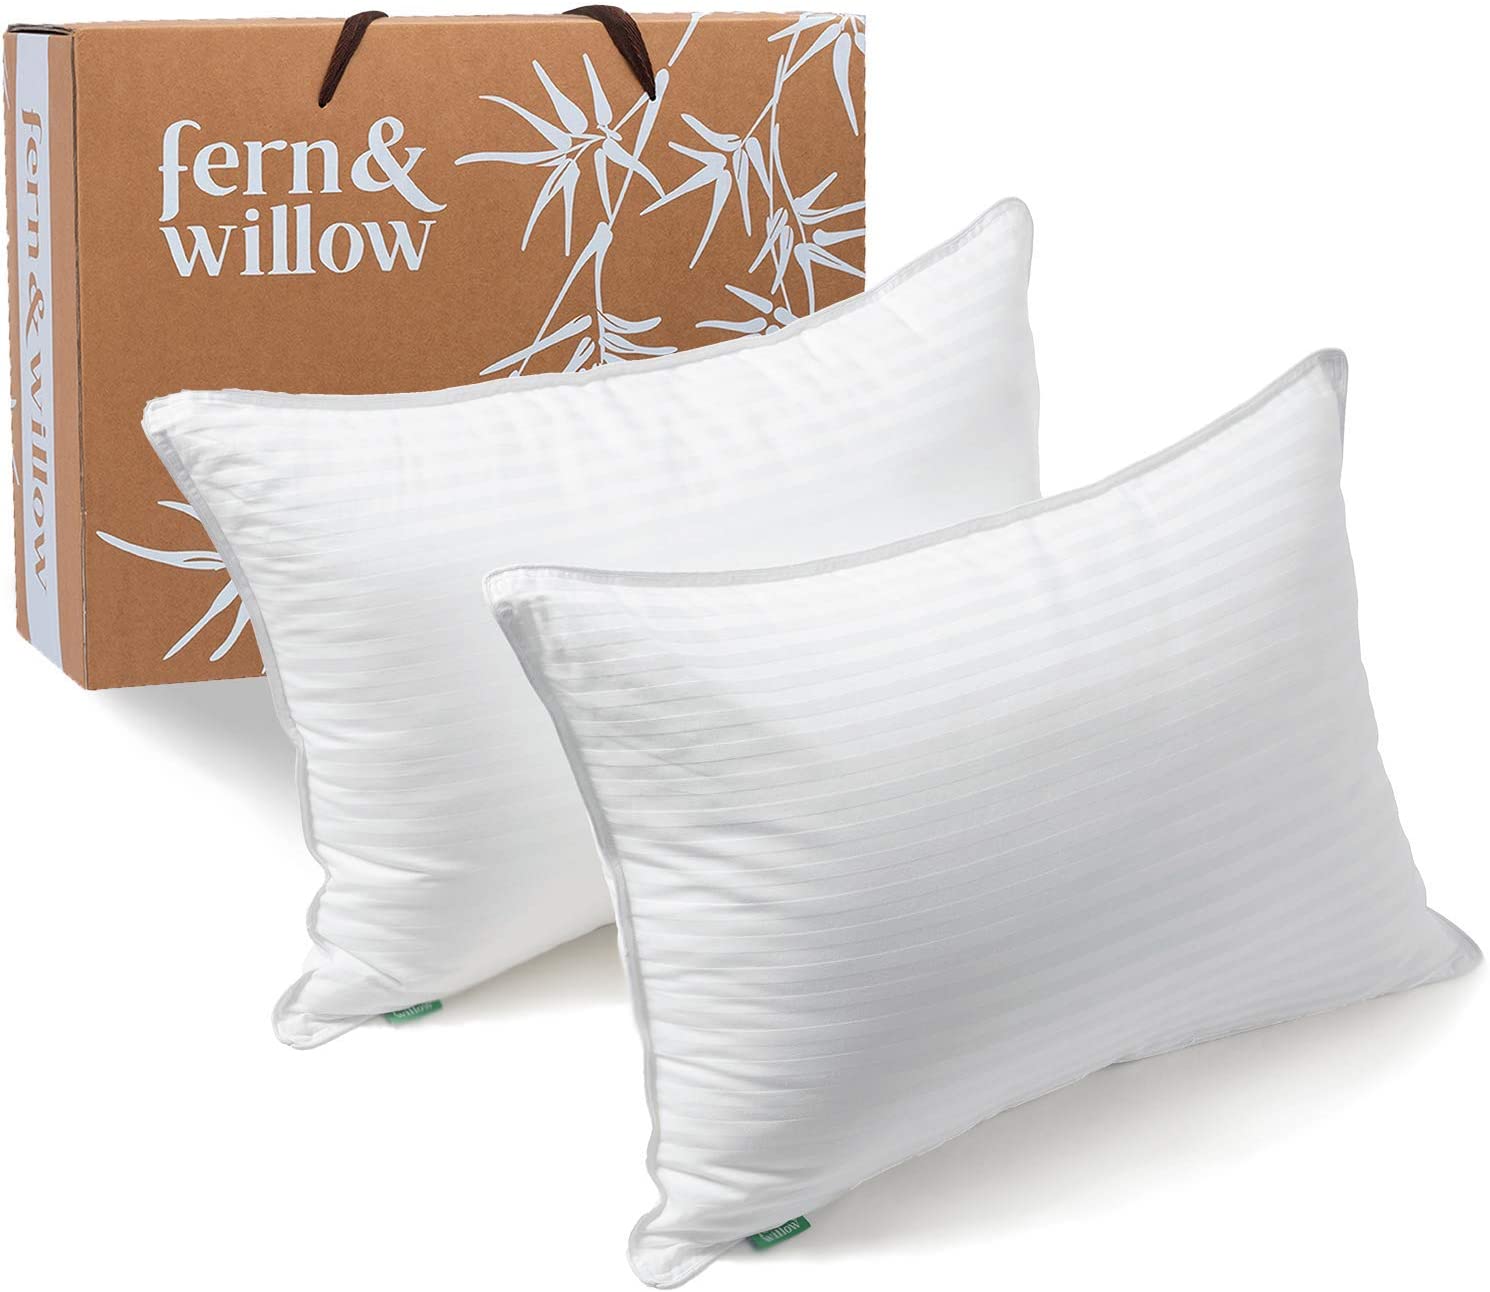 Fern and Willow Pillow